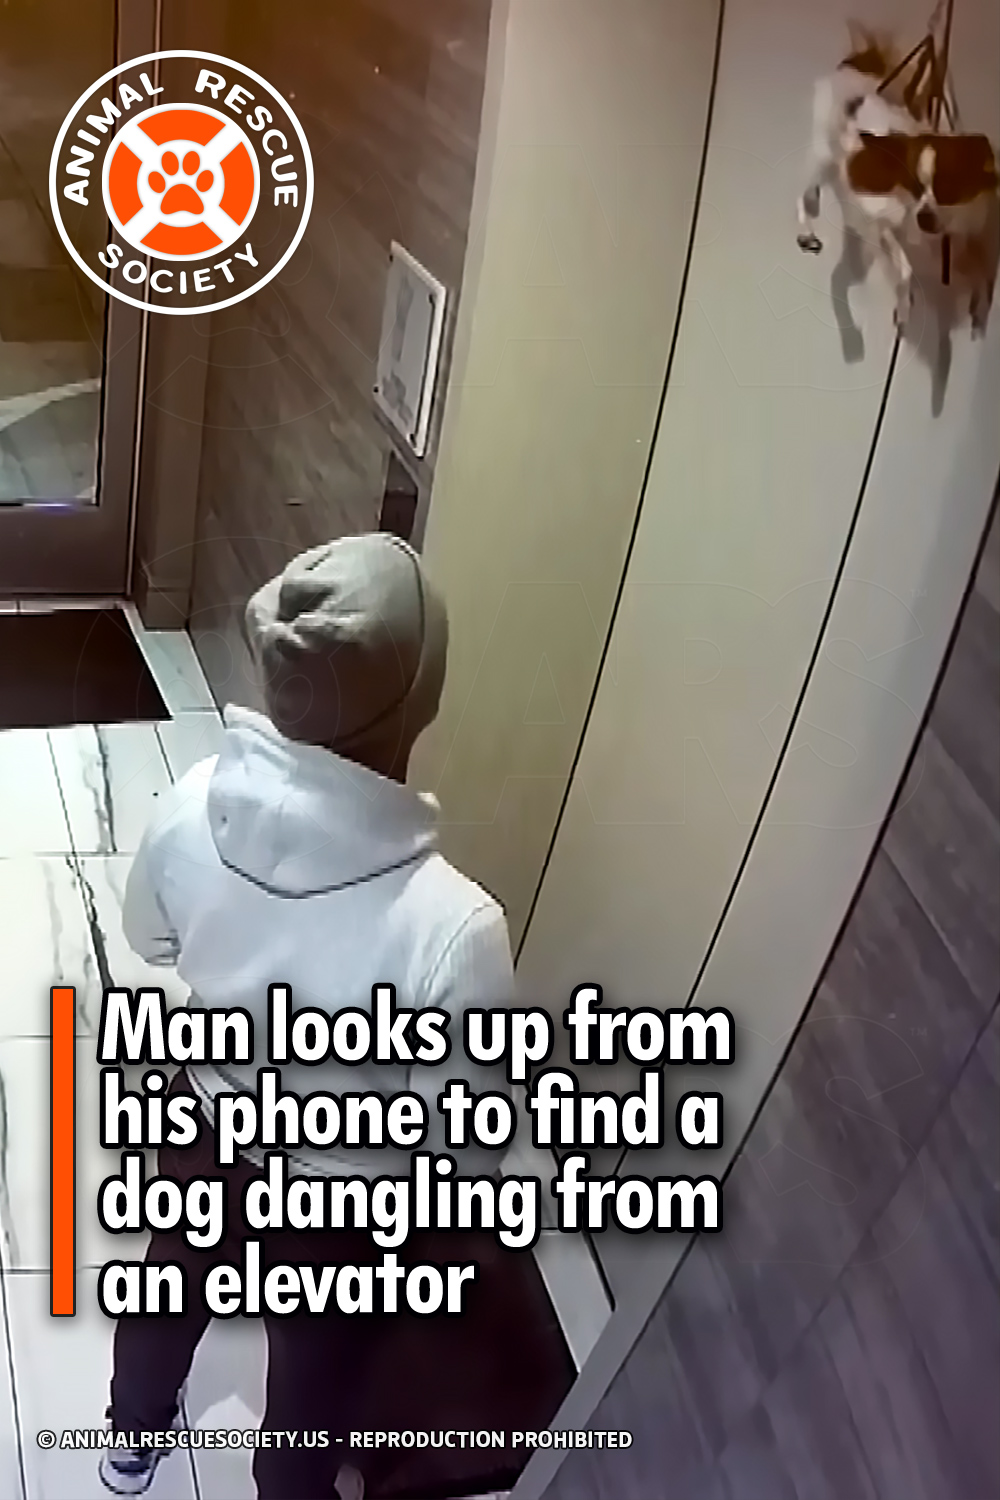 Man looks up from his phone to find a dog dangling from an elevator